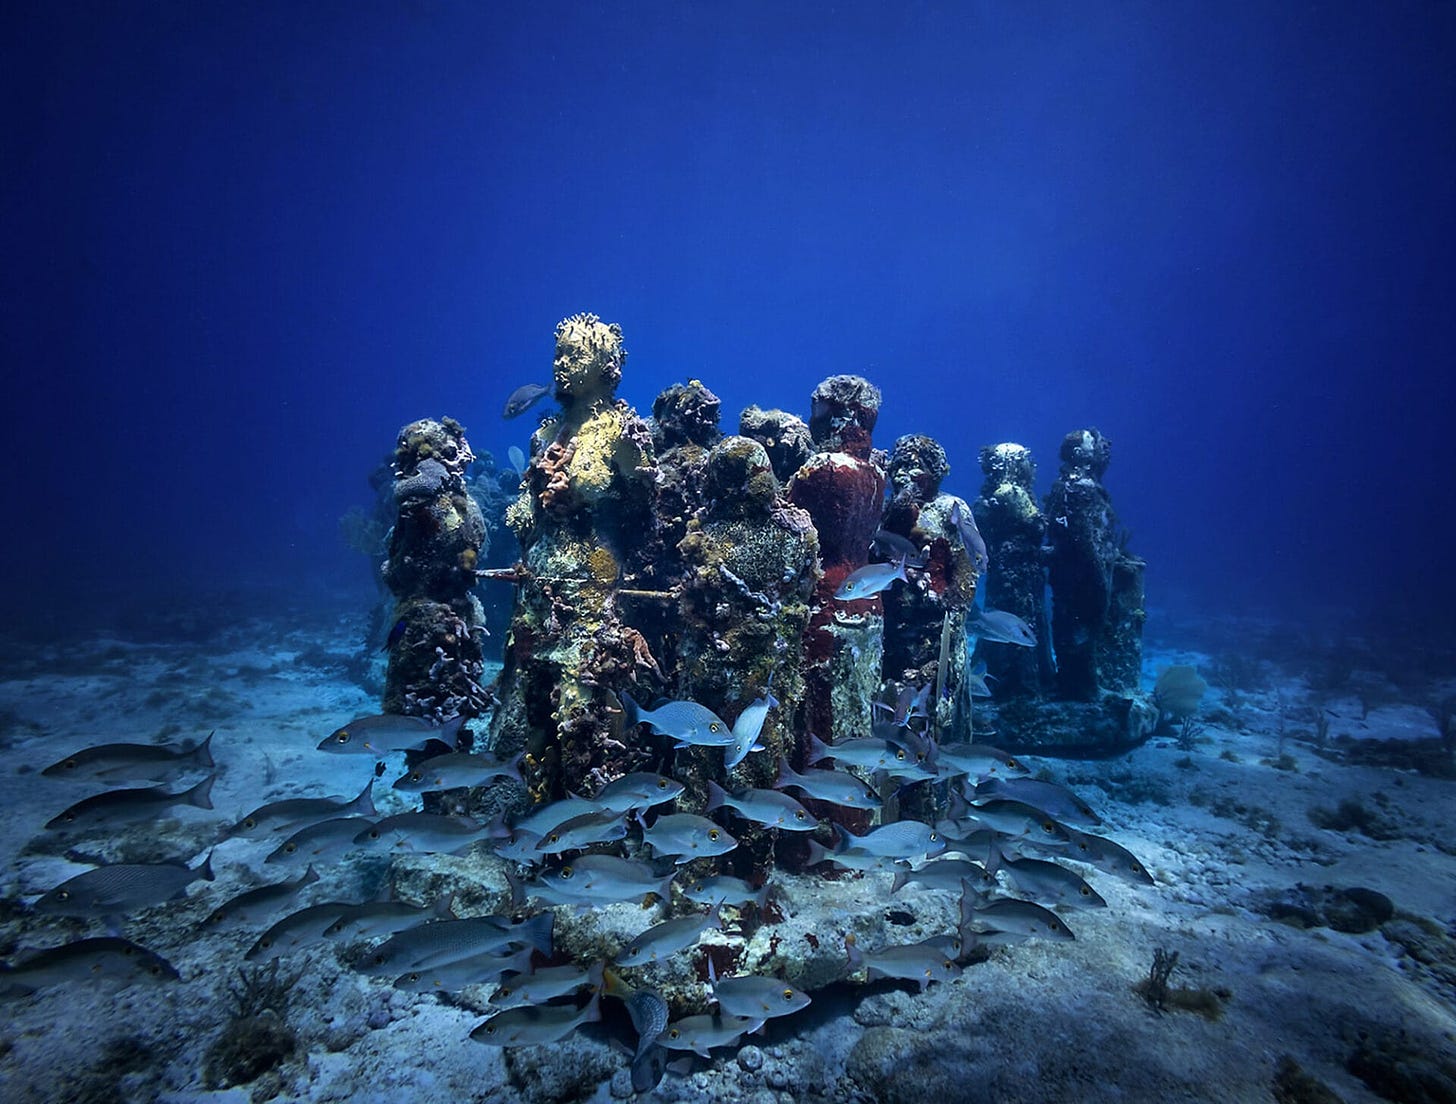 an underwater image of marine animals colonizing figurative sculptures